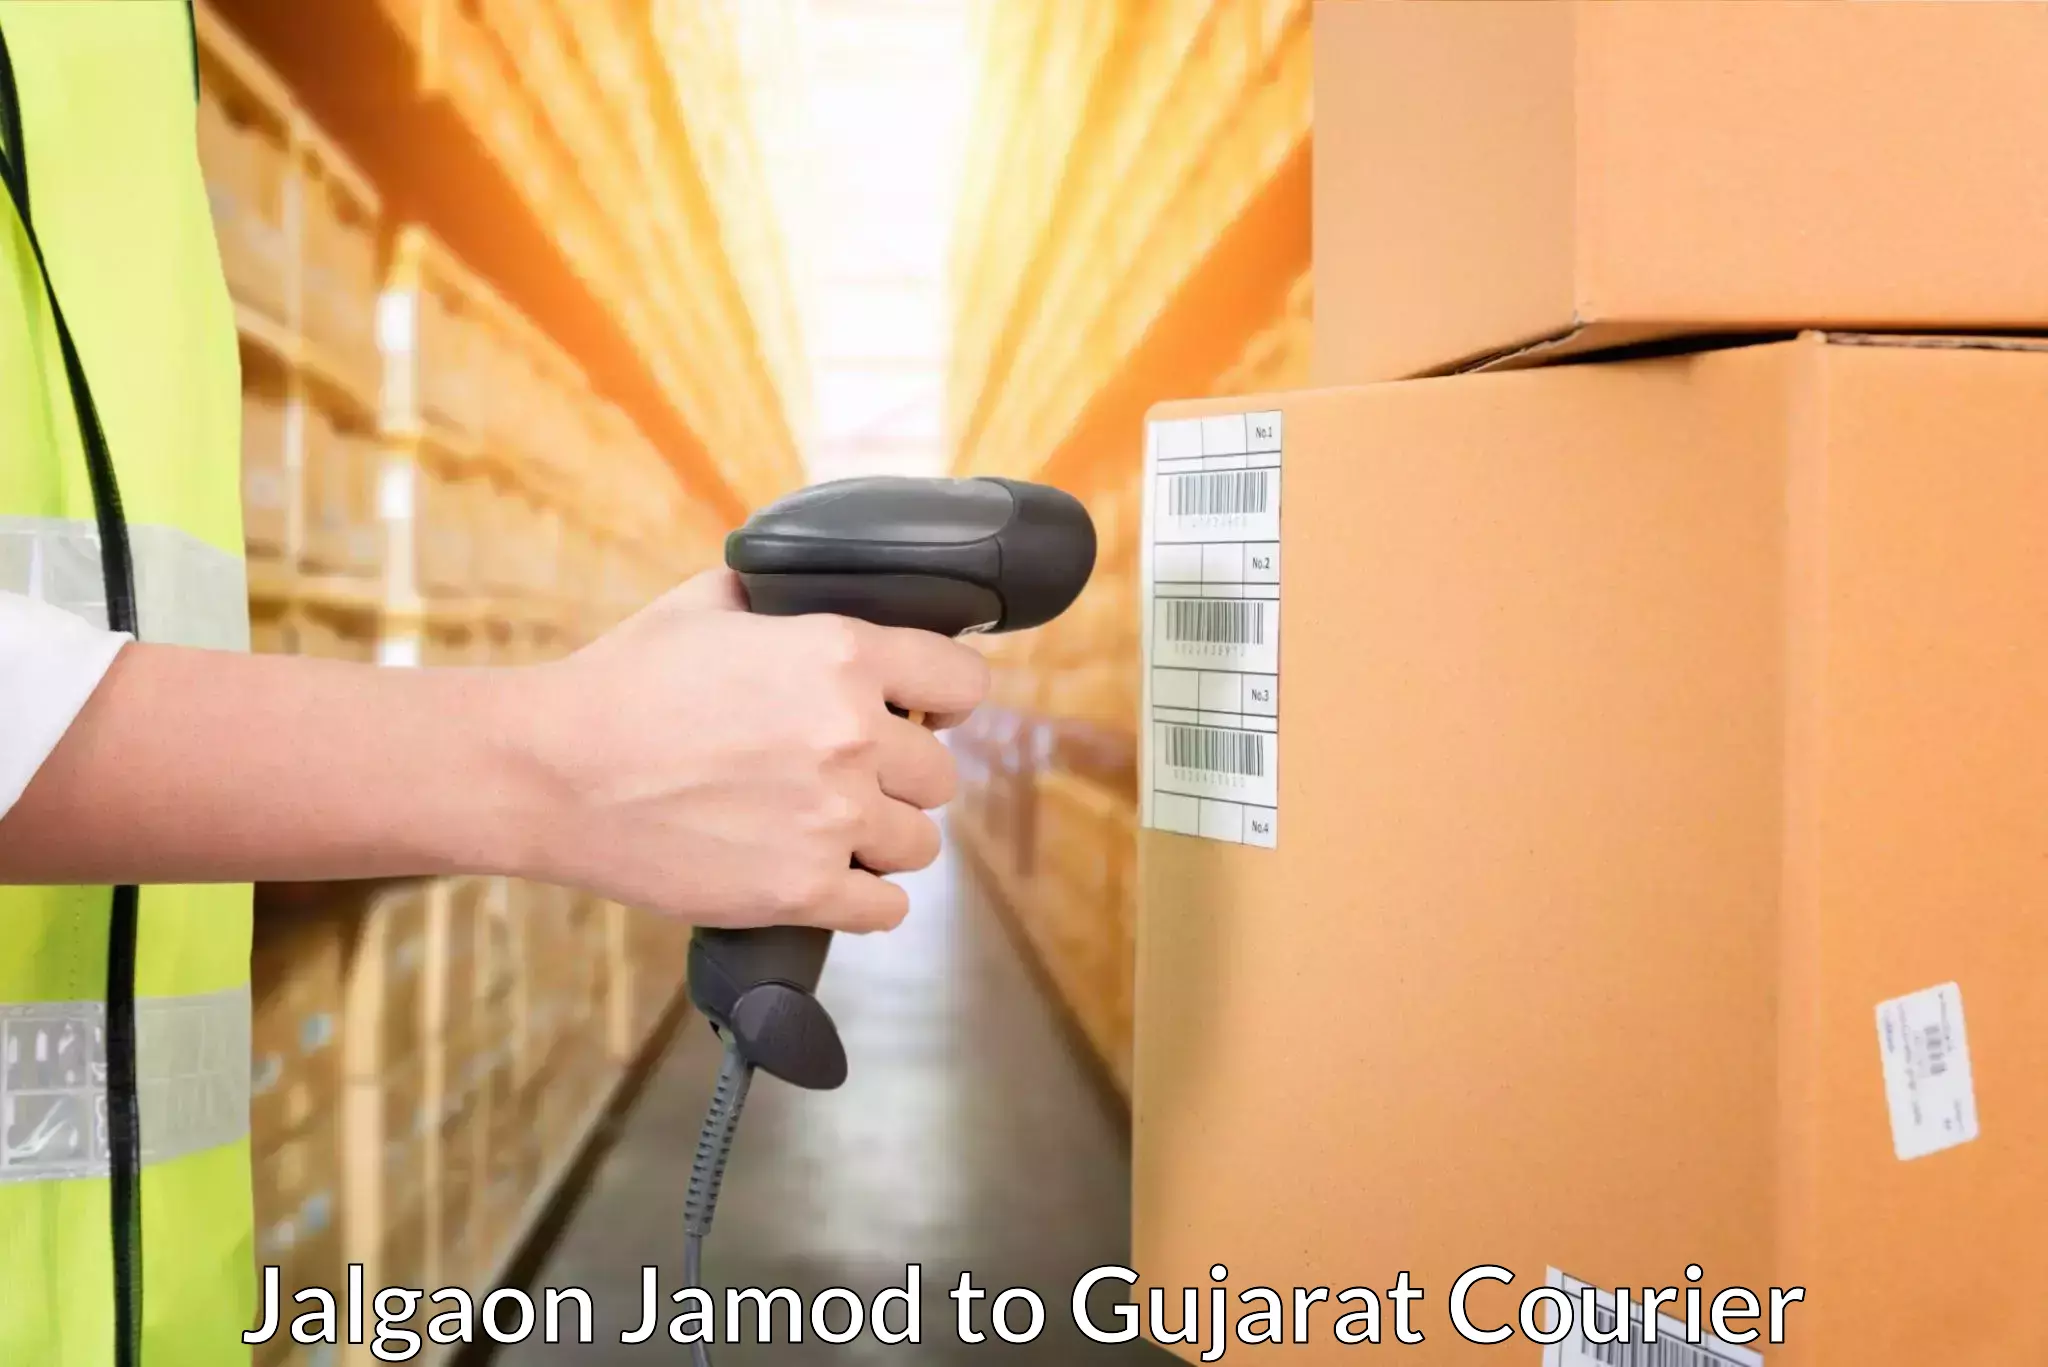 State-of-the-art courier technology Jalgaon Jamod to Dwarka